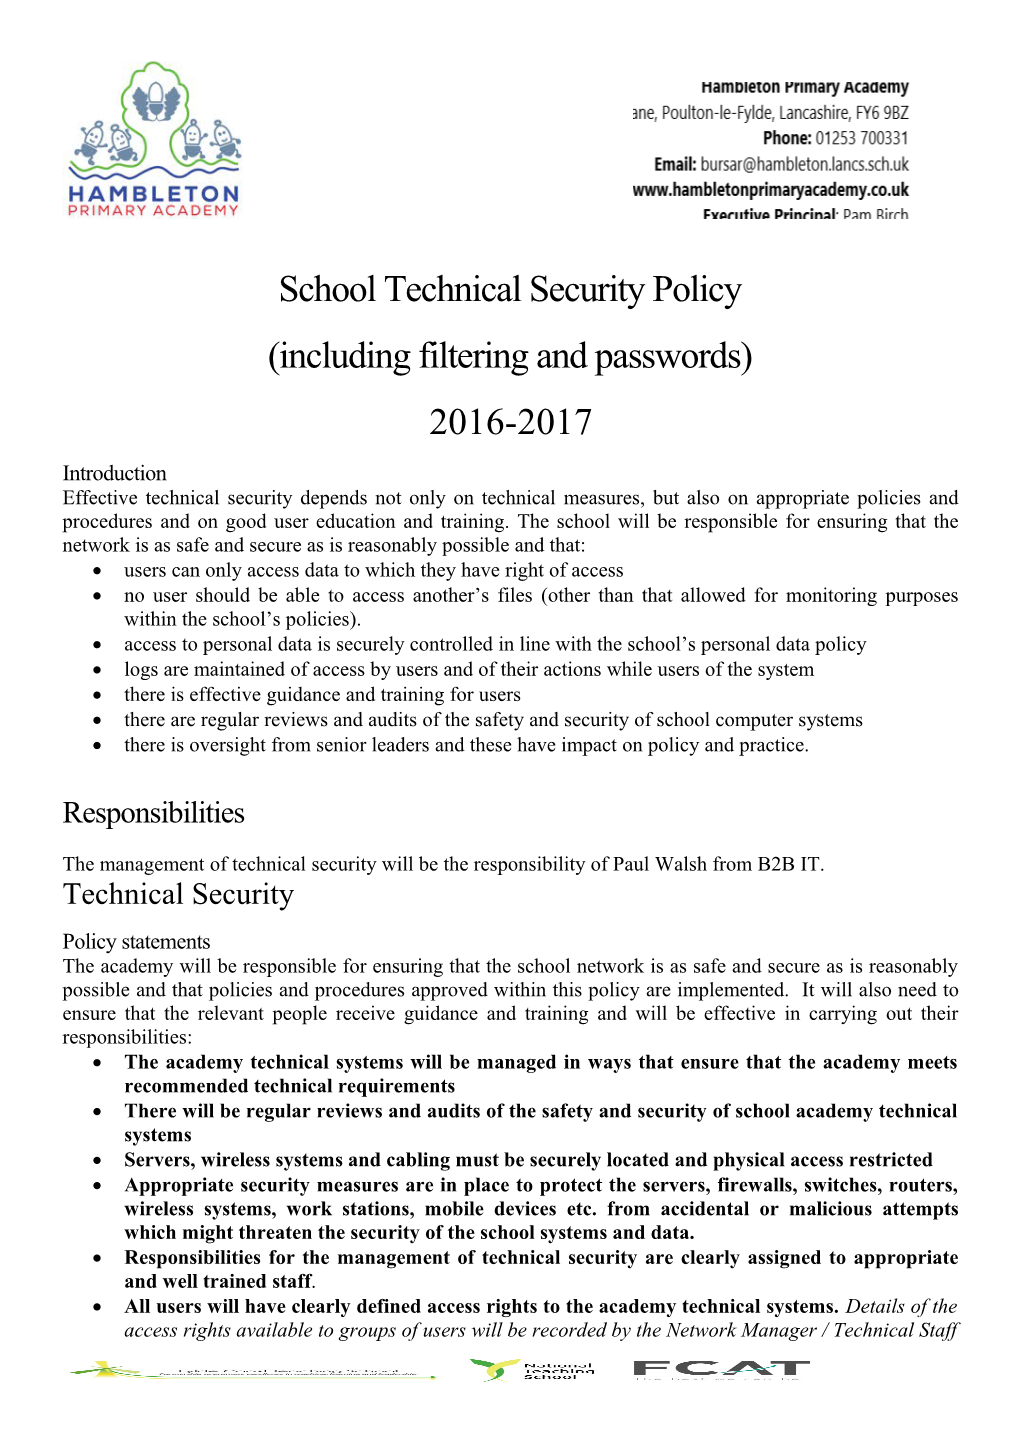 School Technical Security Policy